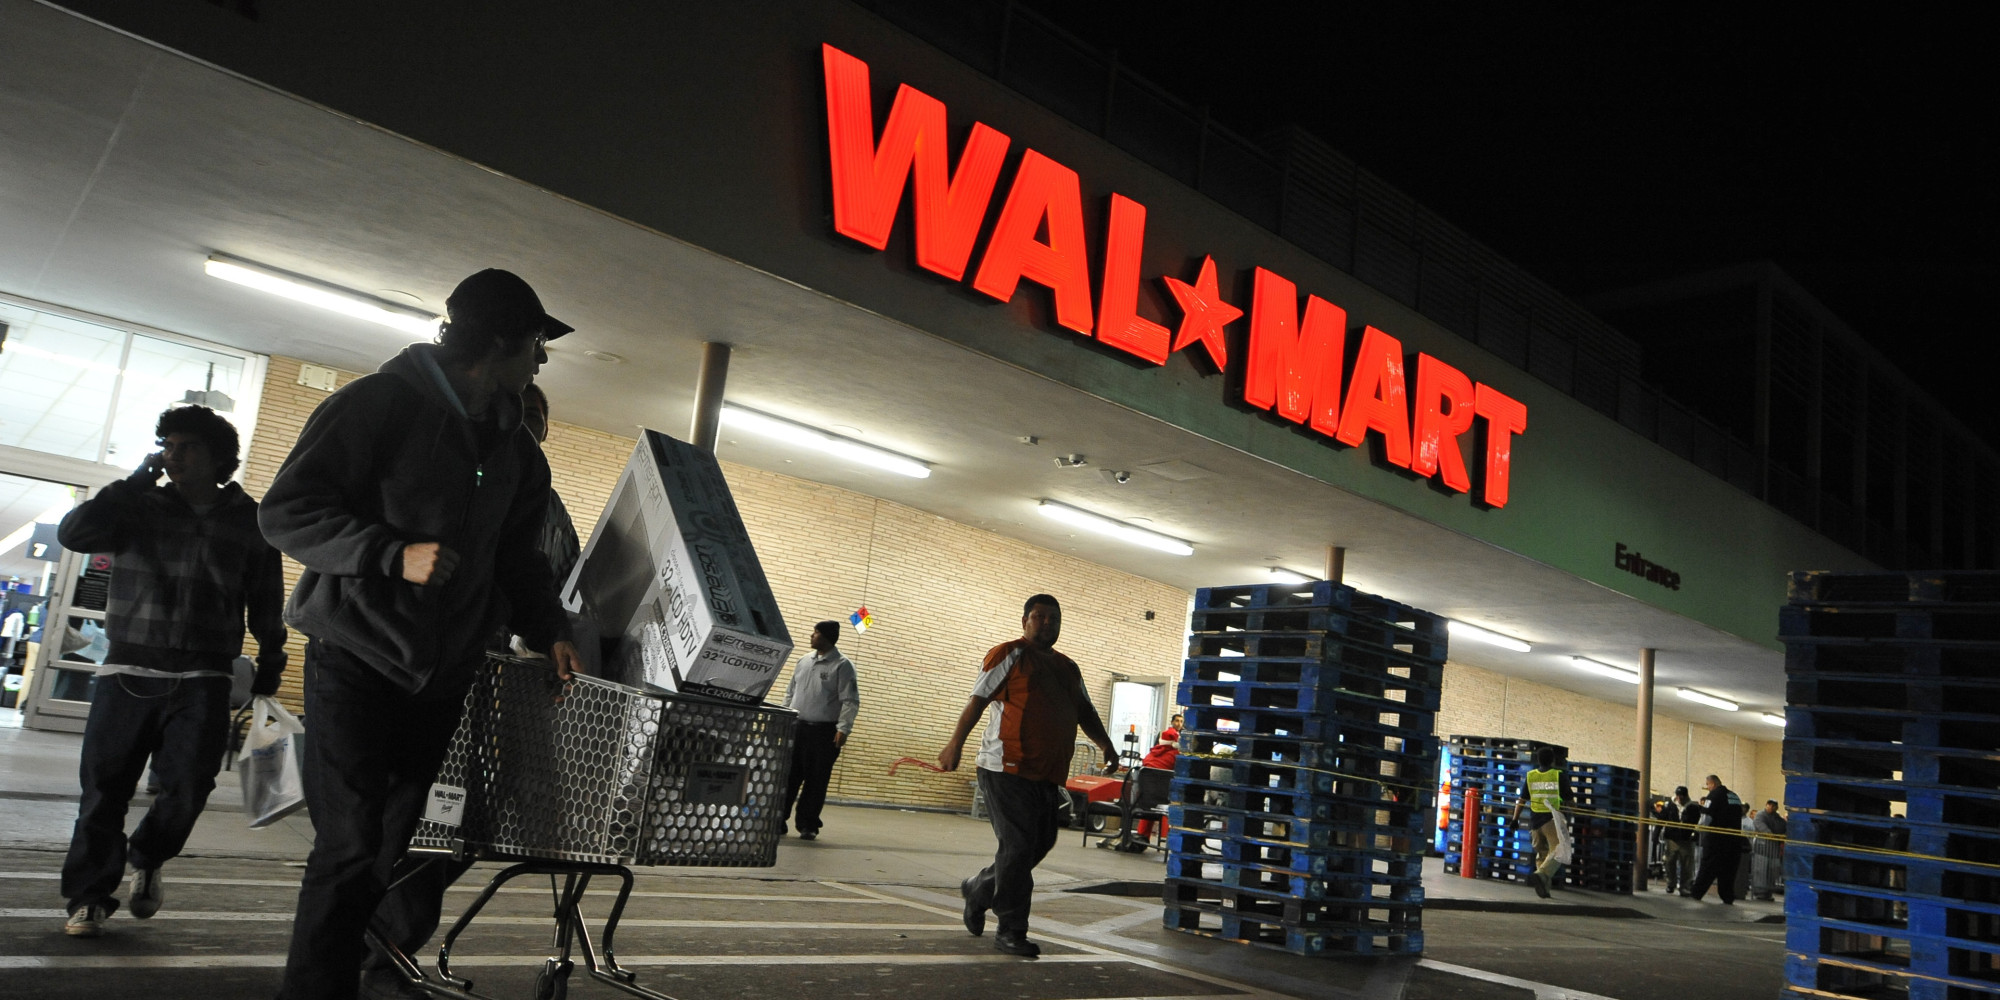 Shoppers wheel their purchases out of a Wal-Mart store in Los Angeles, California, before dawn on Black Friday, November 27, 2009. The annual sales bonanza is held one day after the Thanksgiving holiday. AFP PHOTO / Robyn Beck (Photo credit should read ROBYN BECK/AFP/Getty Images)